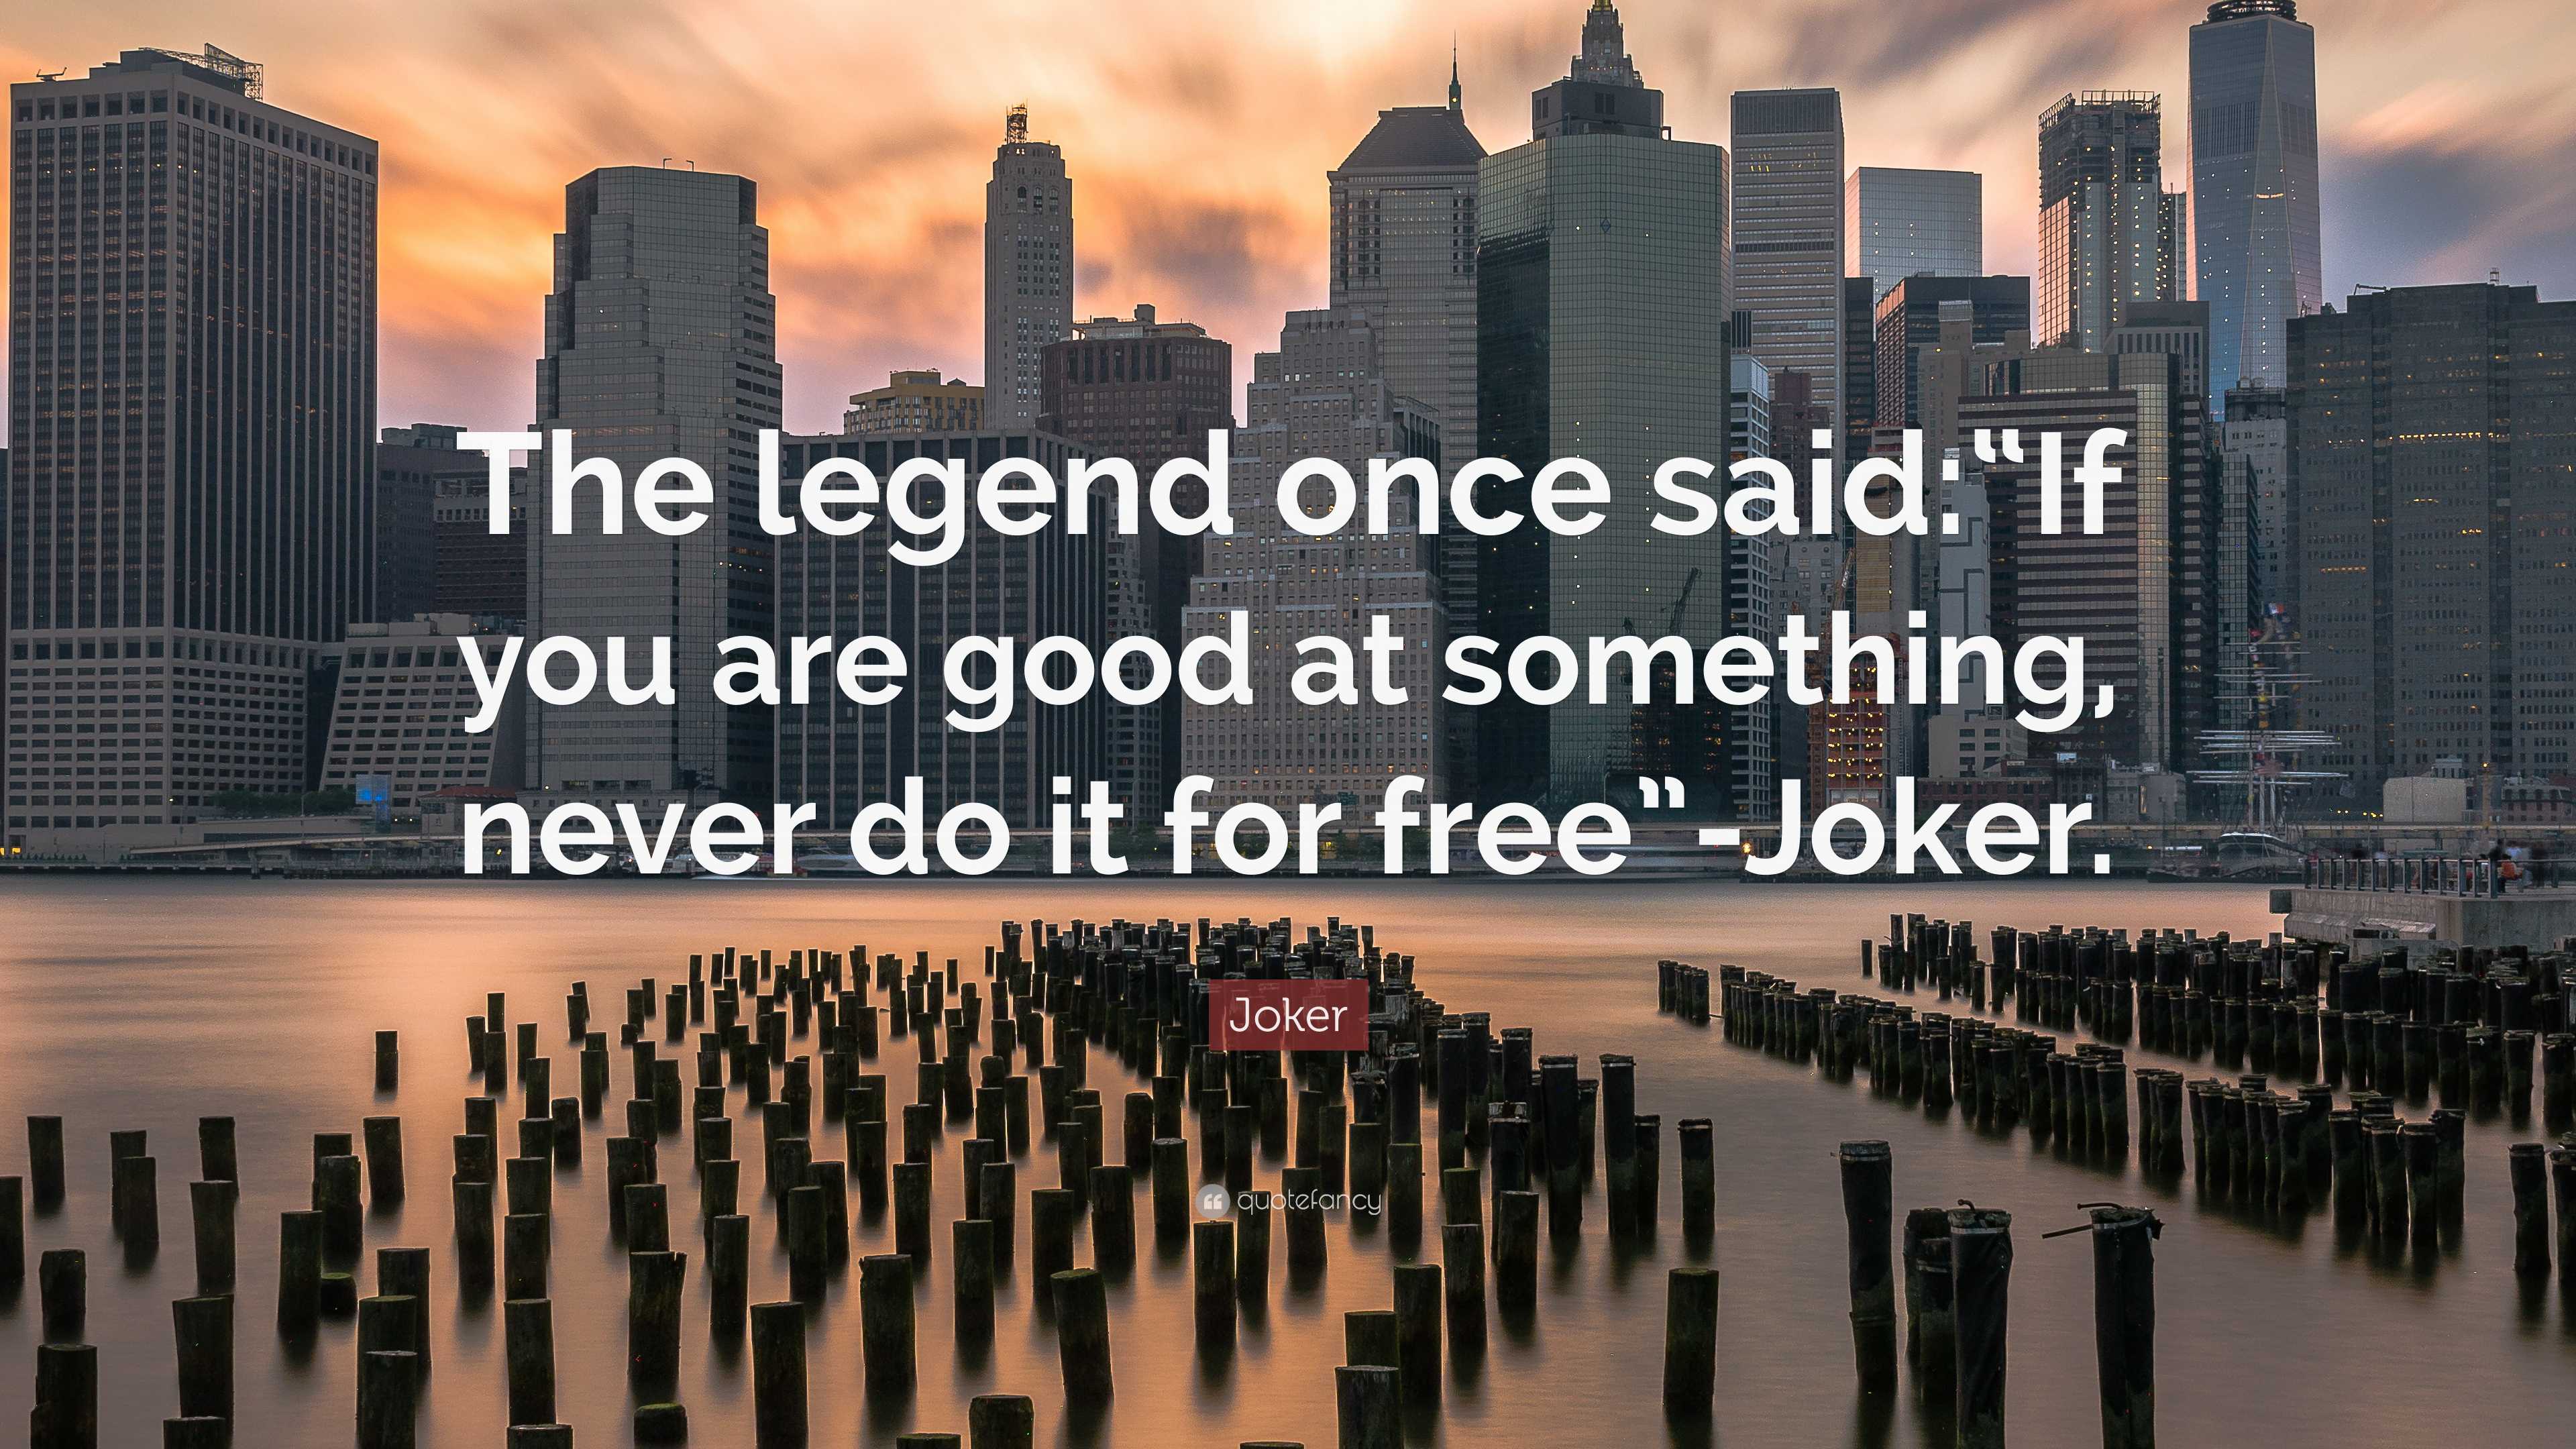 Joker quotes - #life is a game 👈